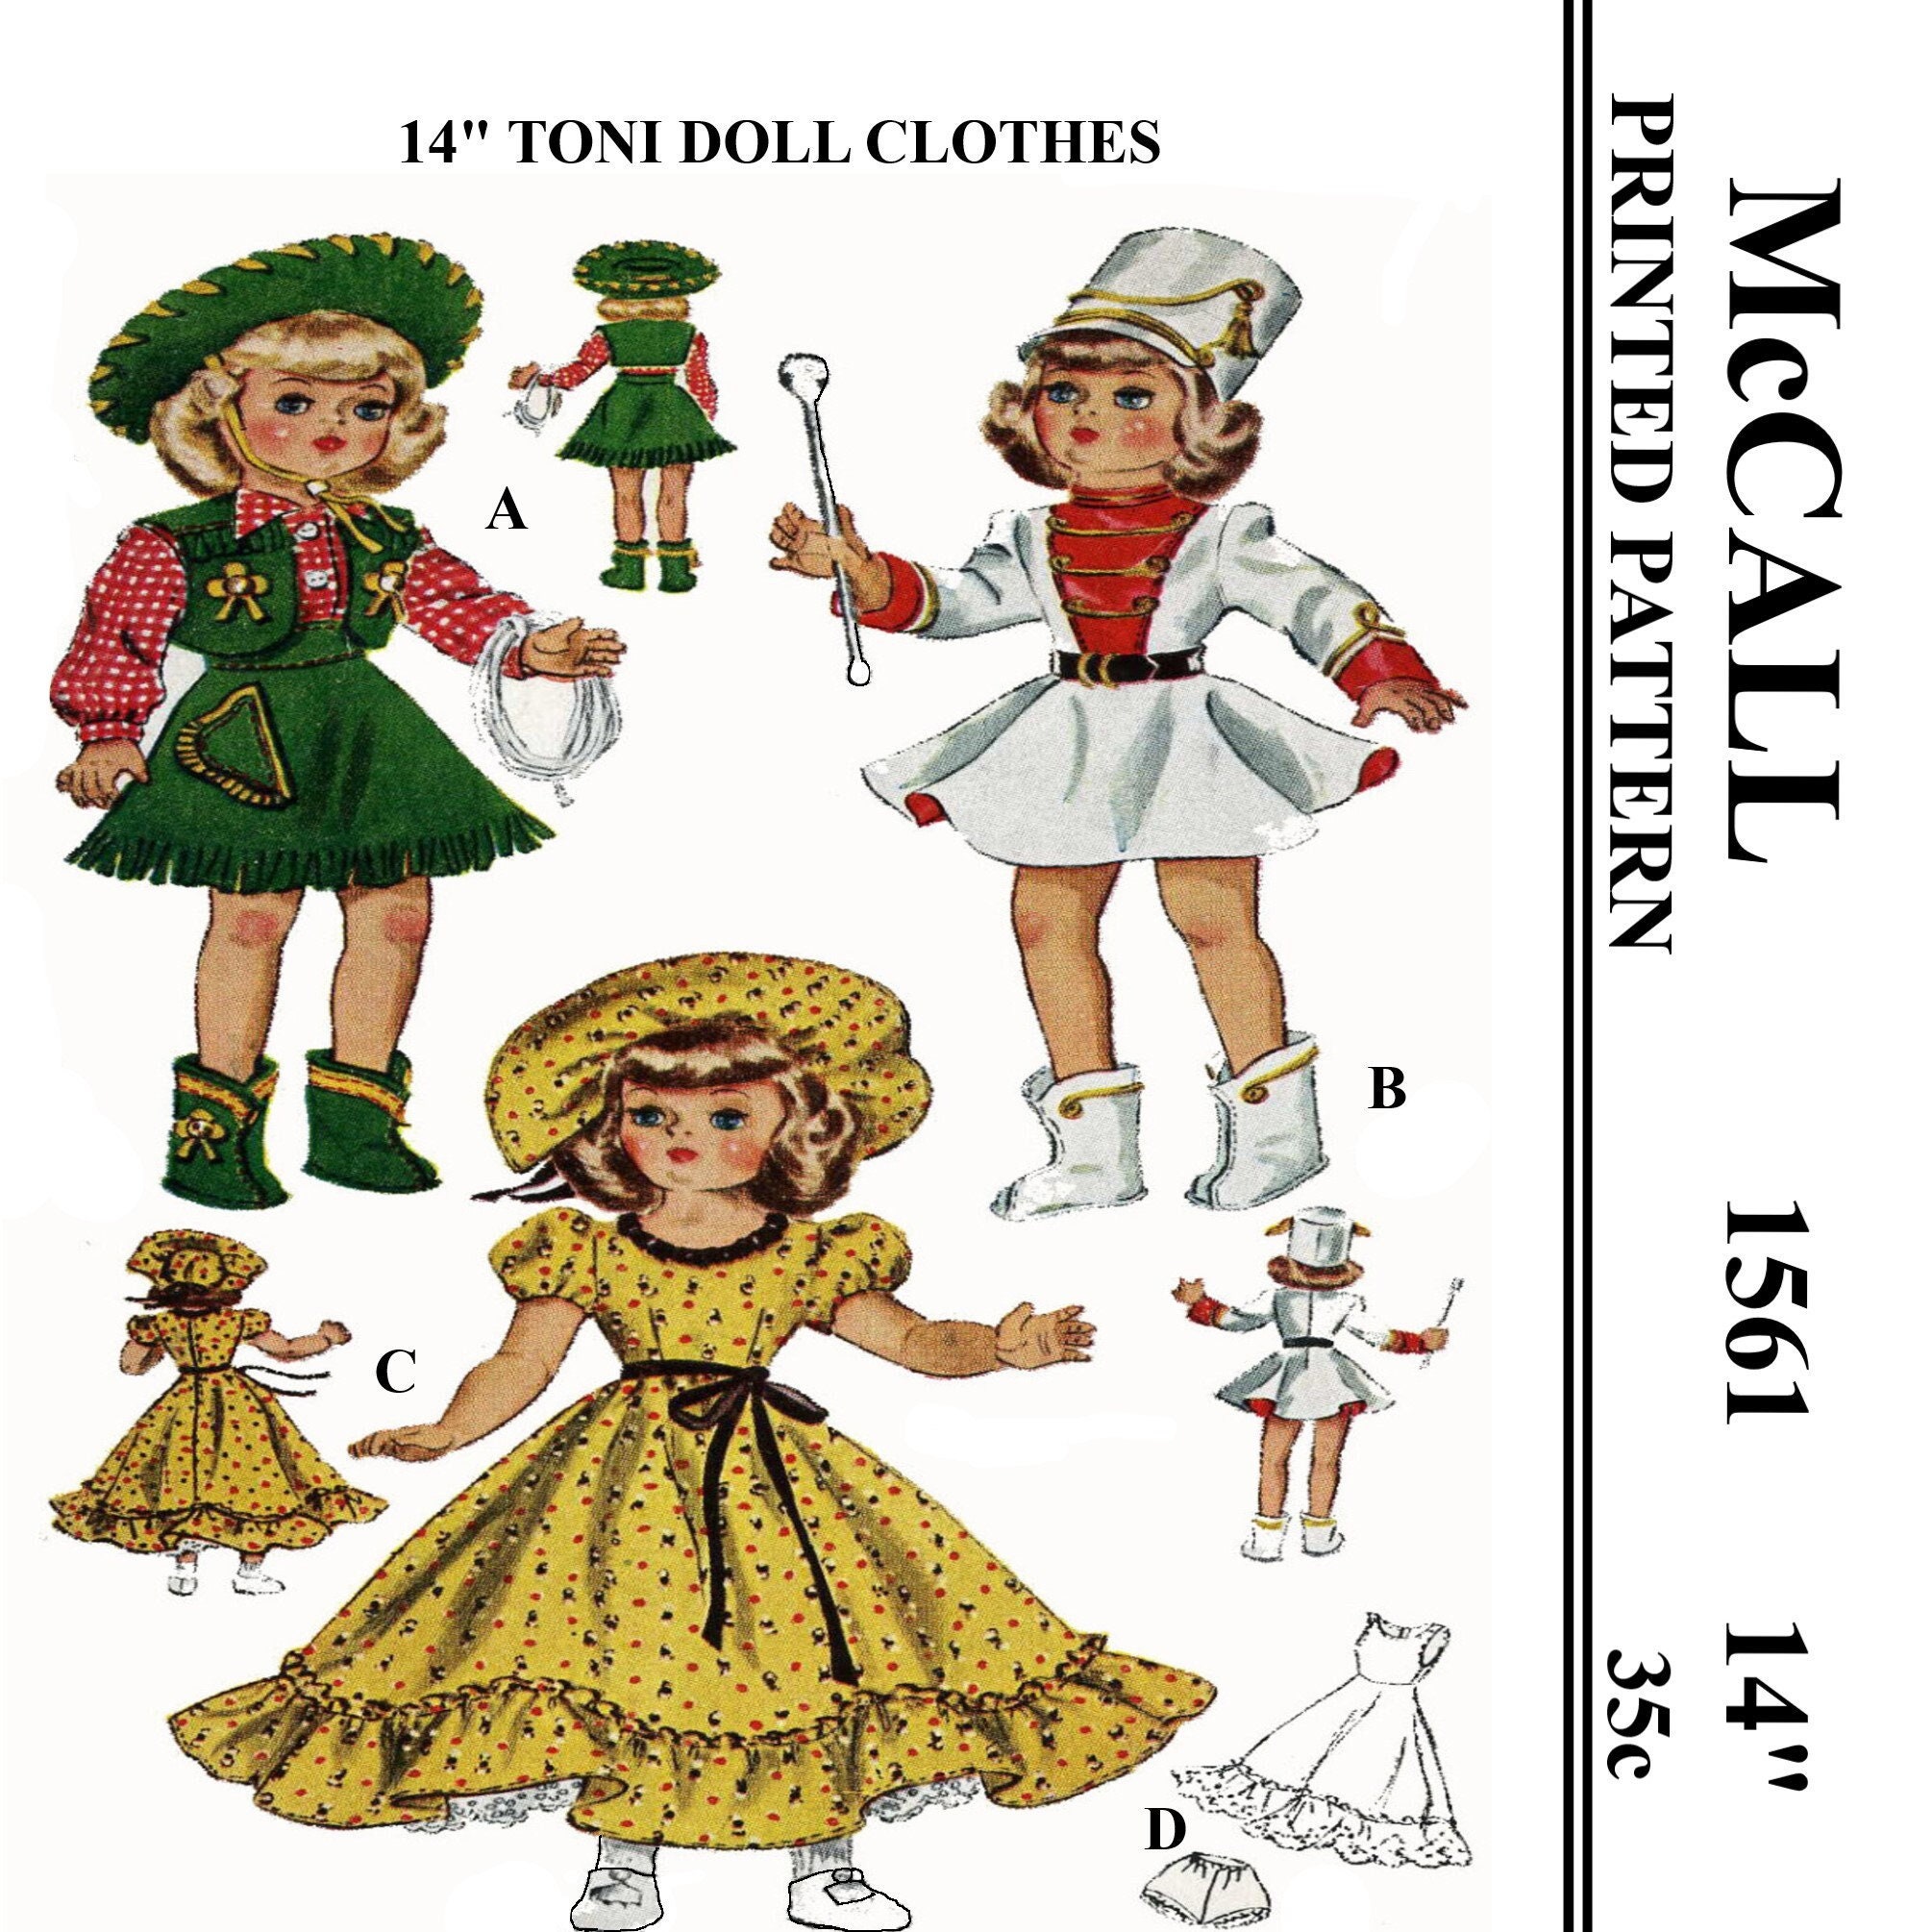 Vintage 1950's McCall 1561-14 inch Toni Doll Clothes Sewing pattern 